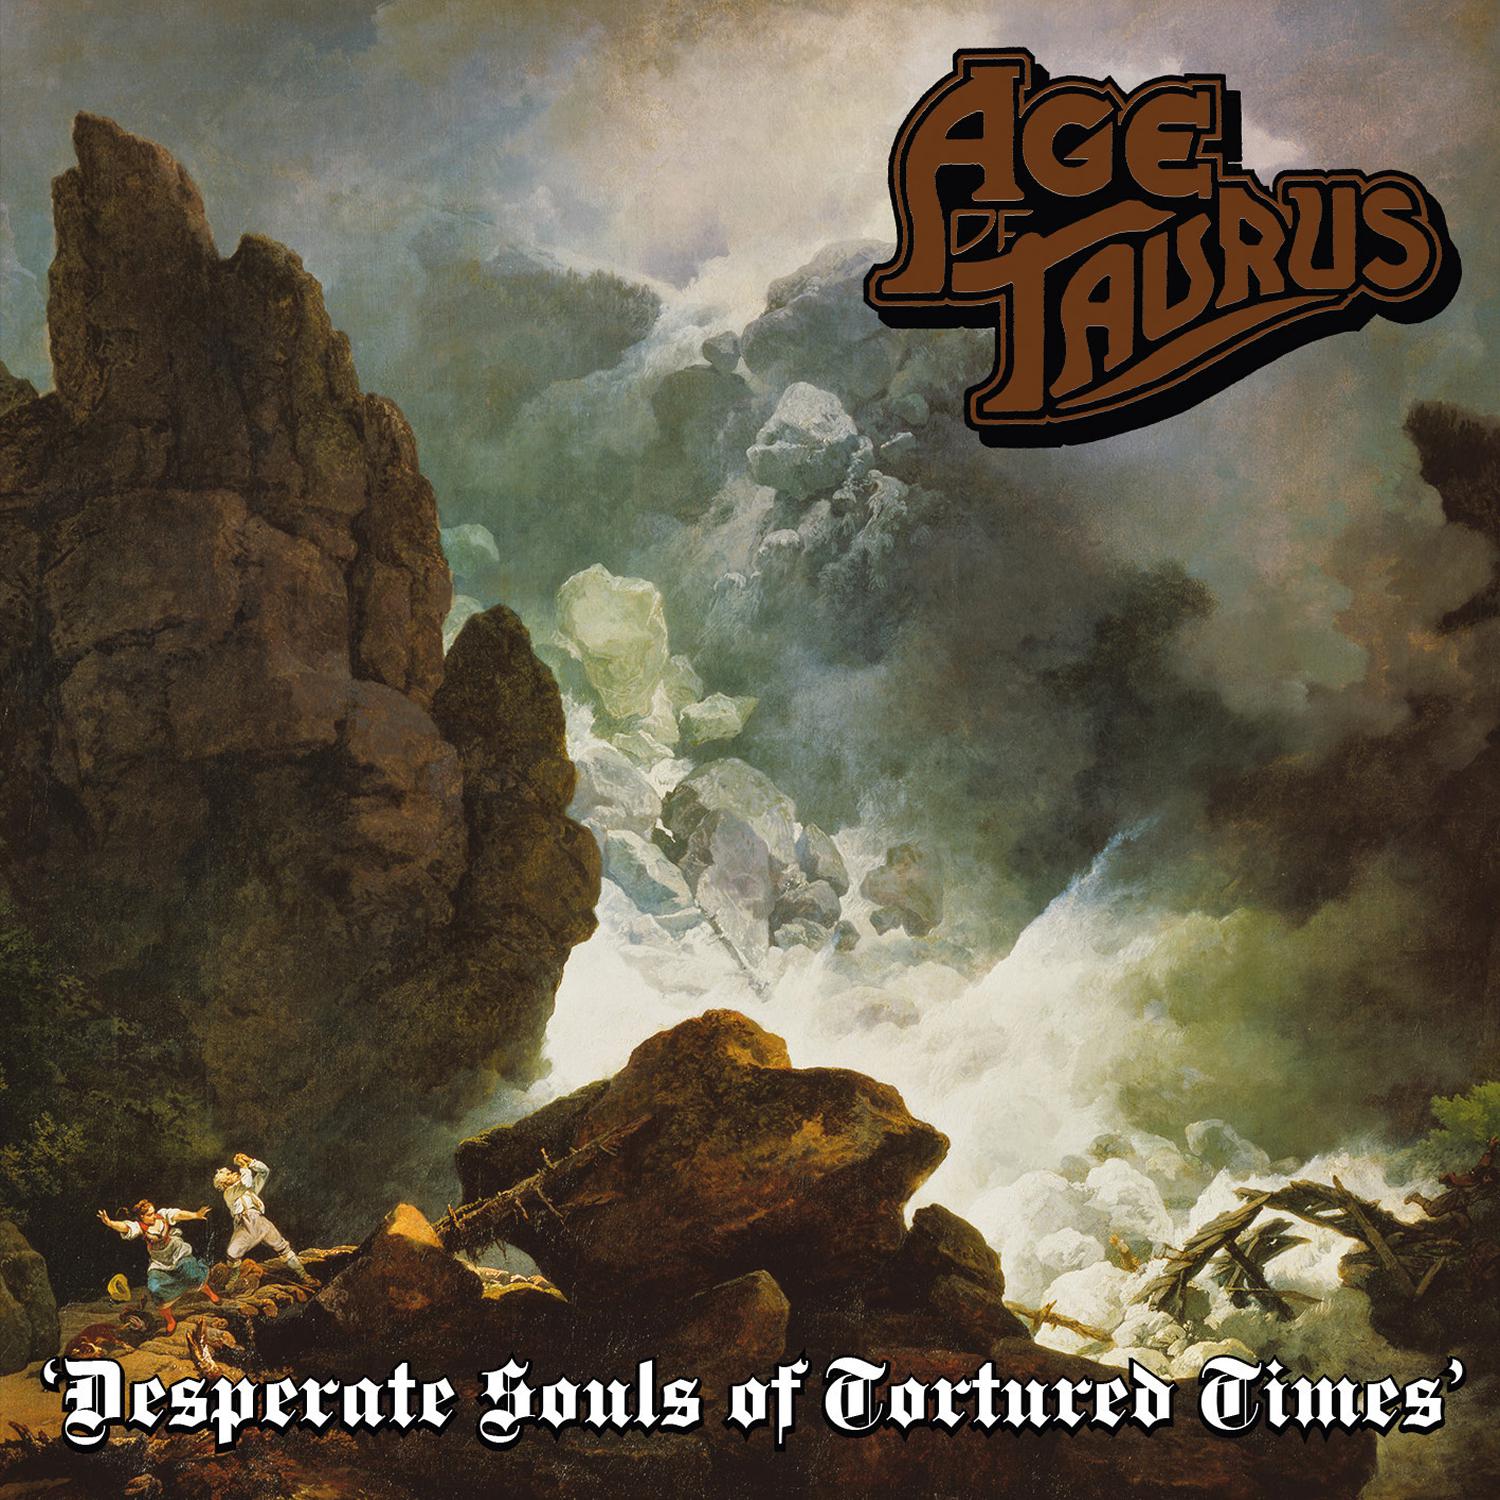 Age of Taurus - A Rush of Power